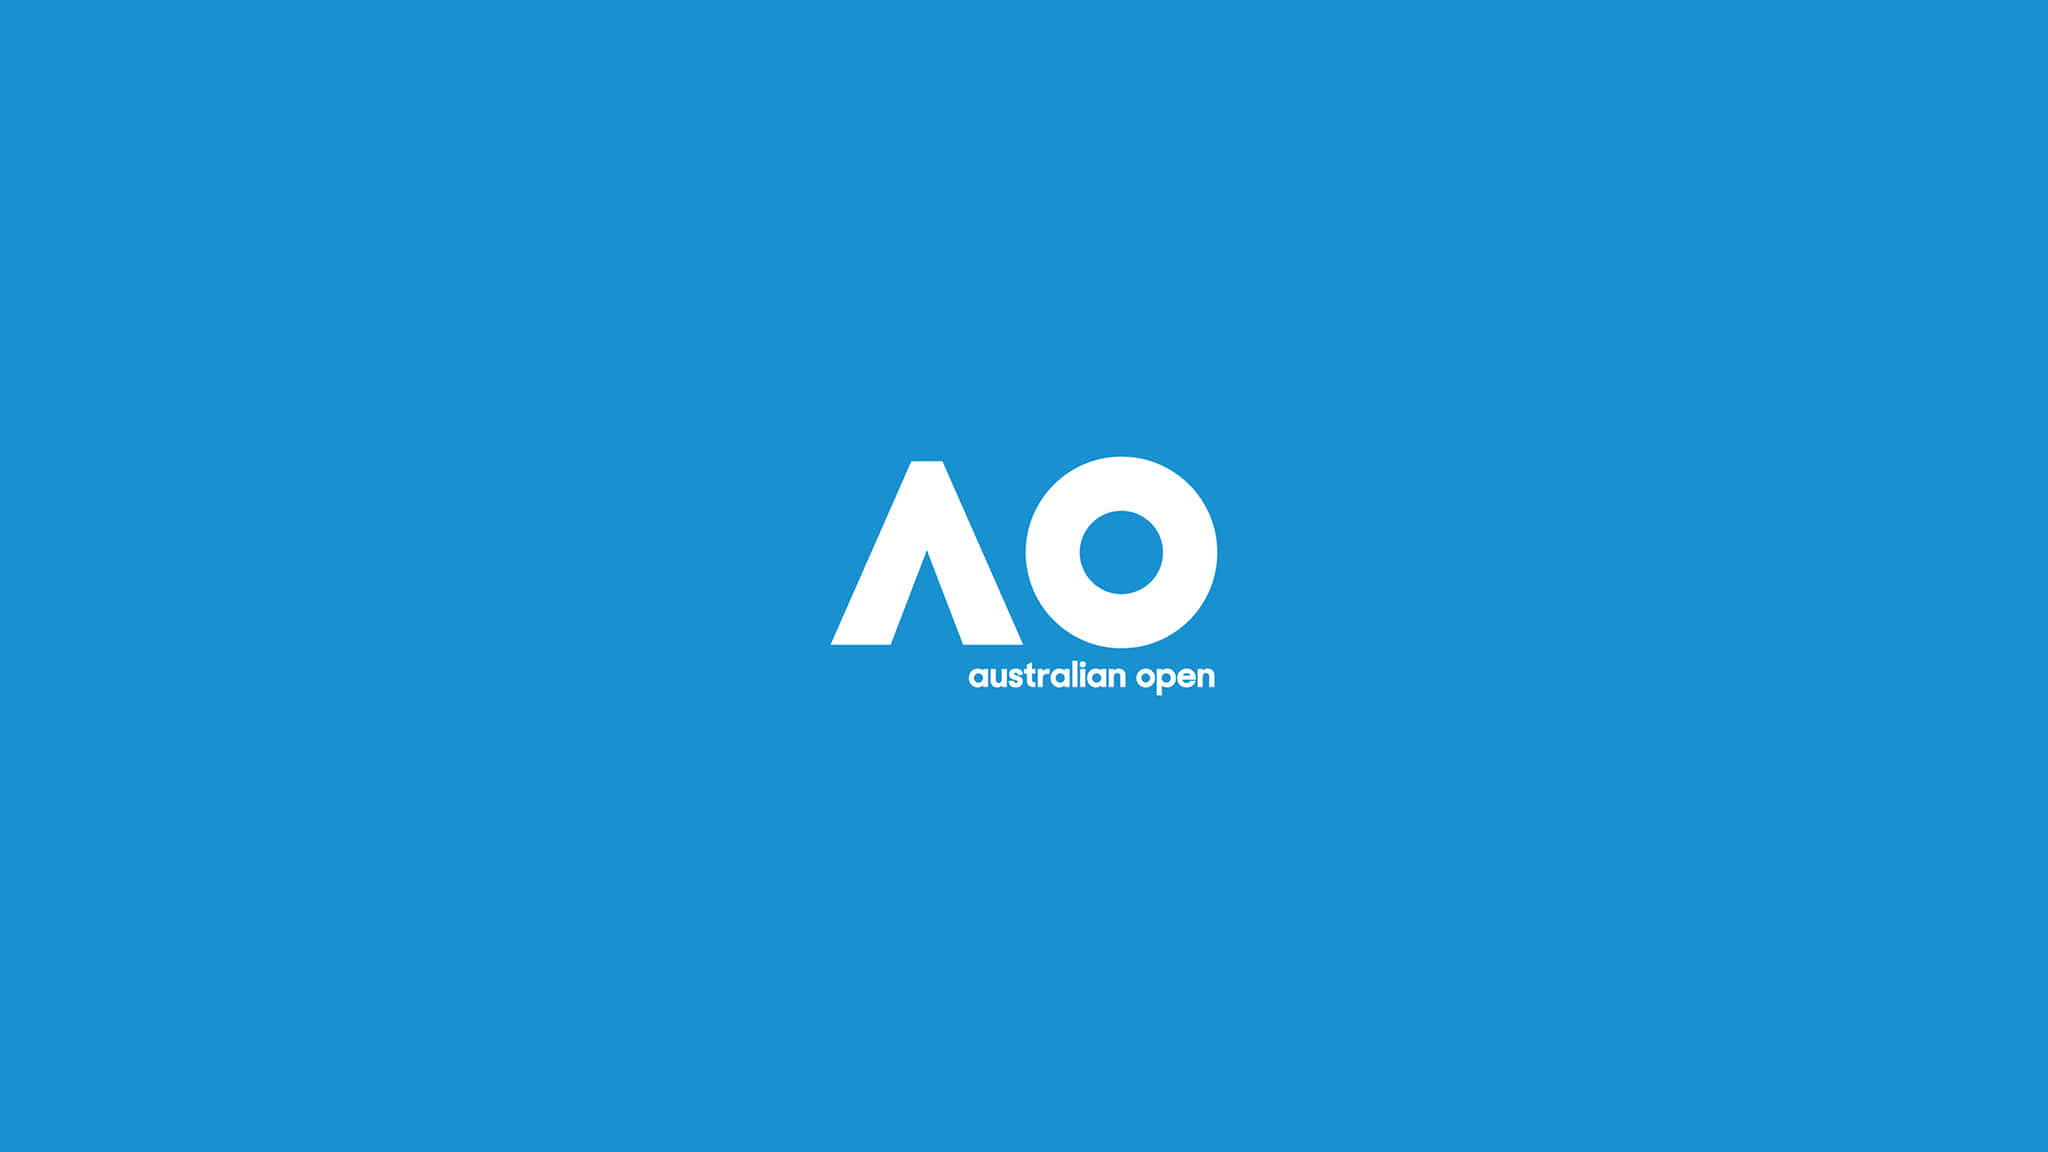 A Blue Background With The Word Oa On It